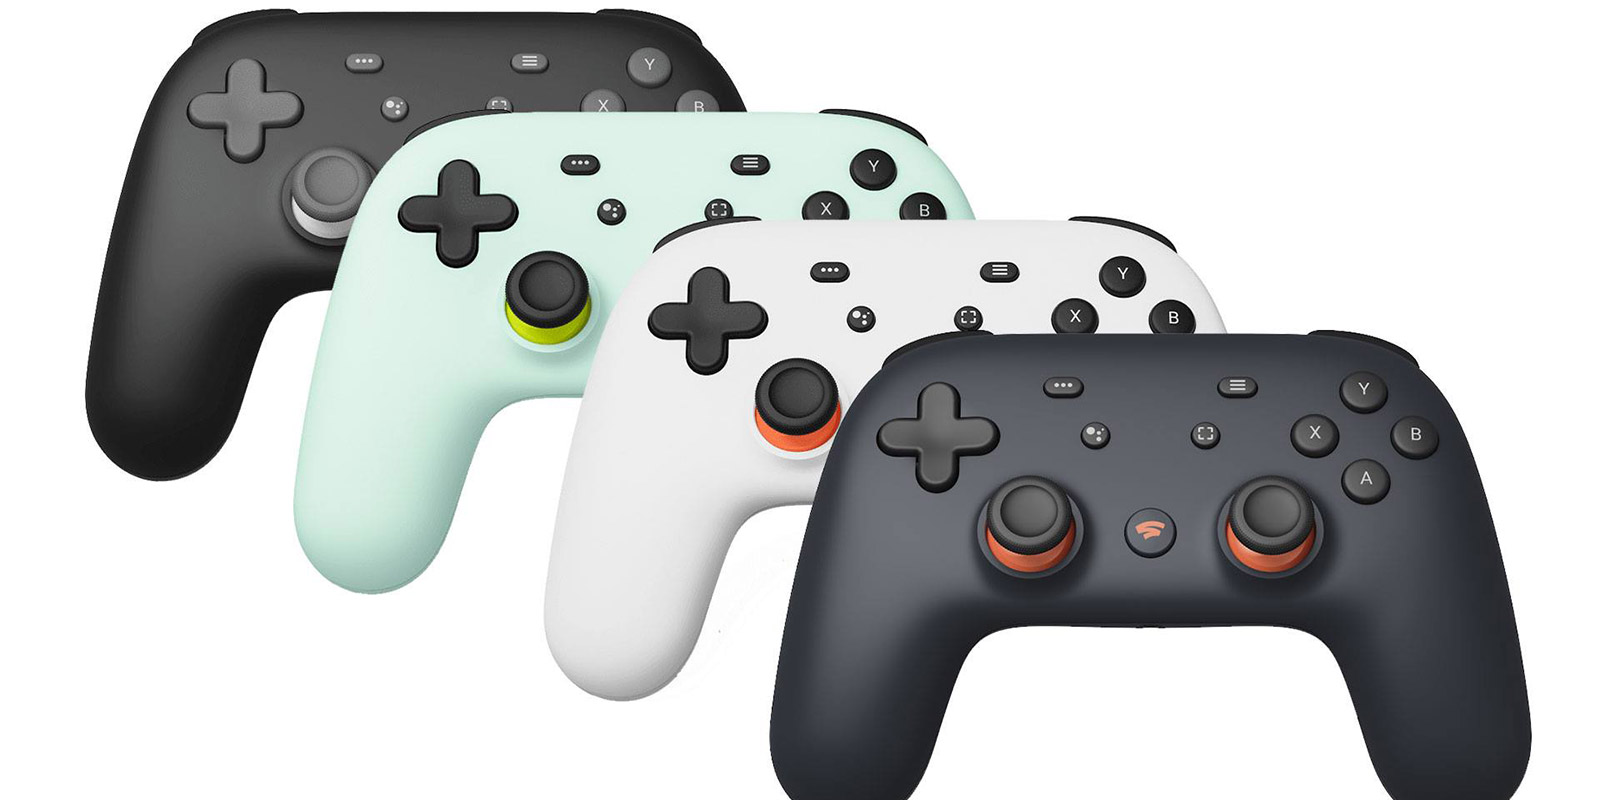 10 Interesting Google Stadia Games That Are Worth Getting Excited About